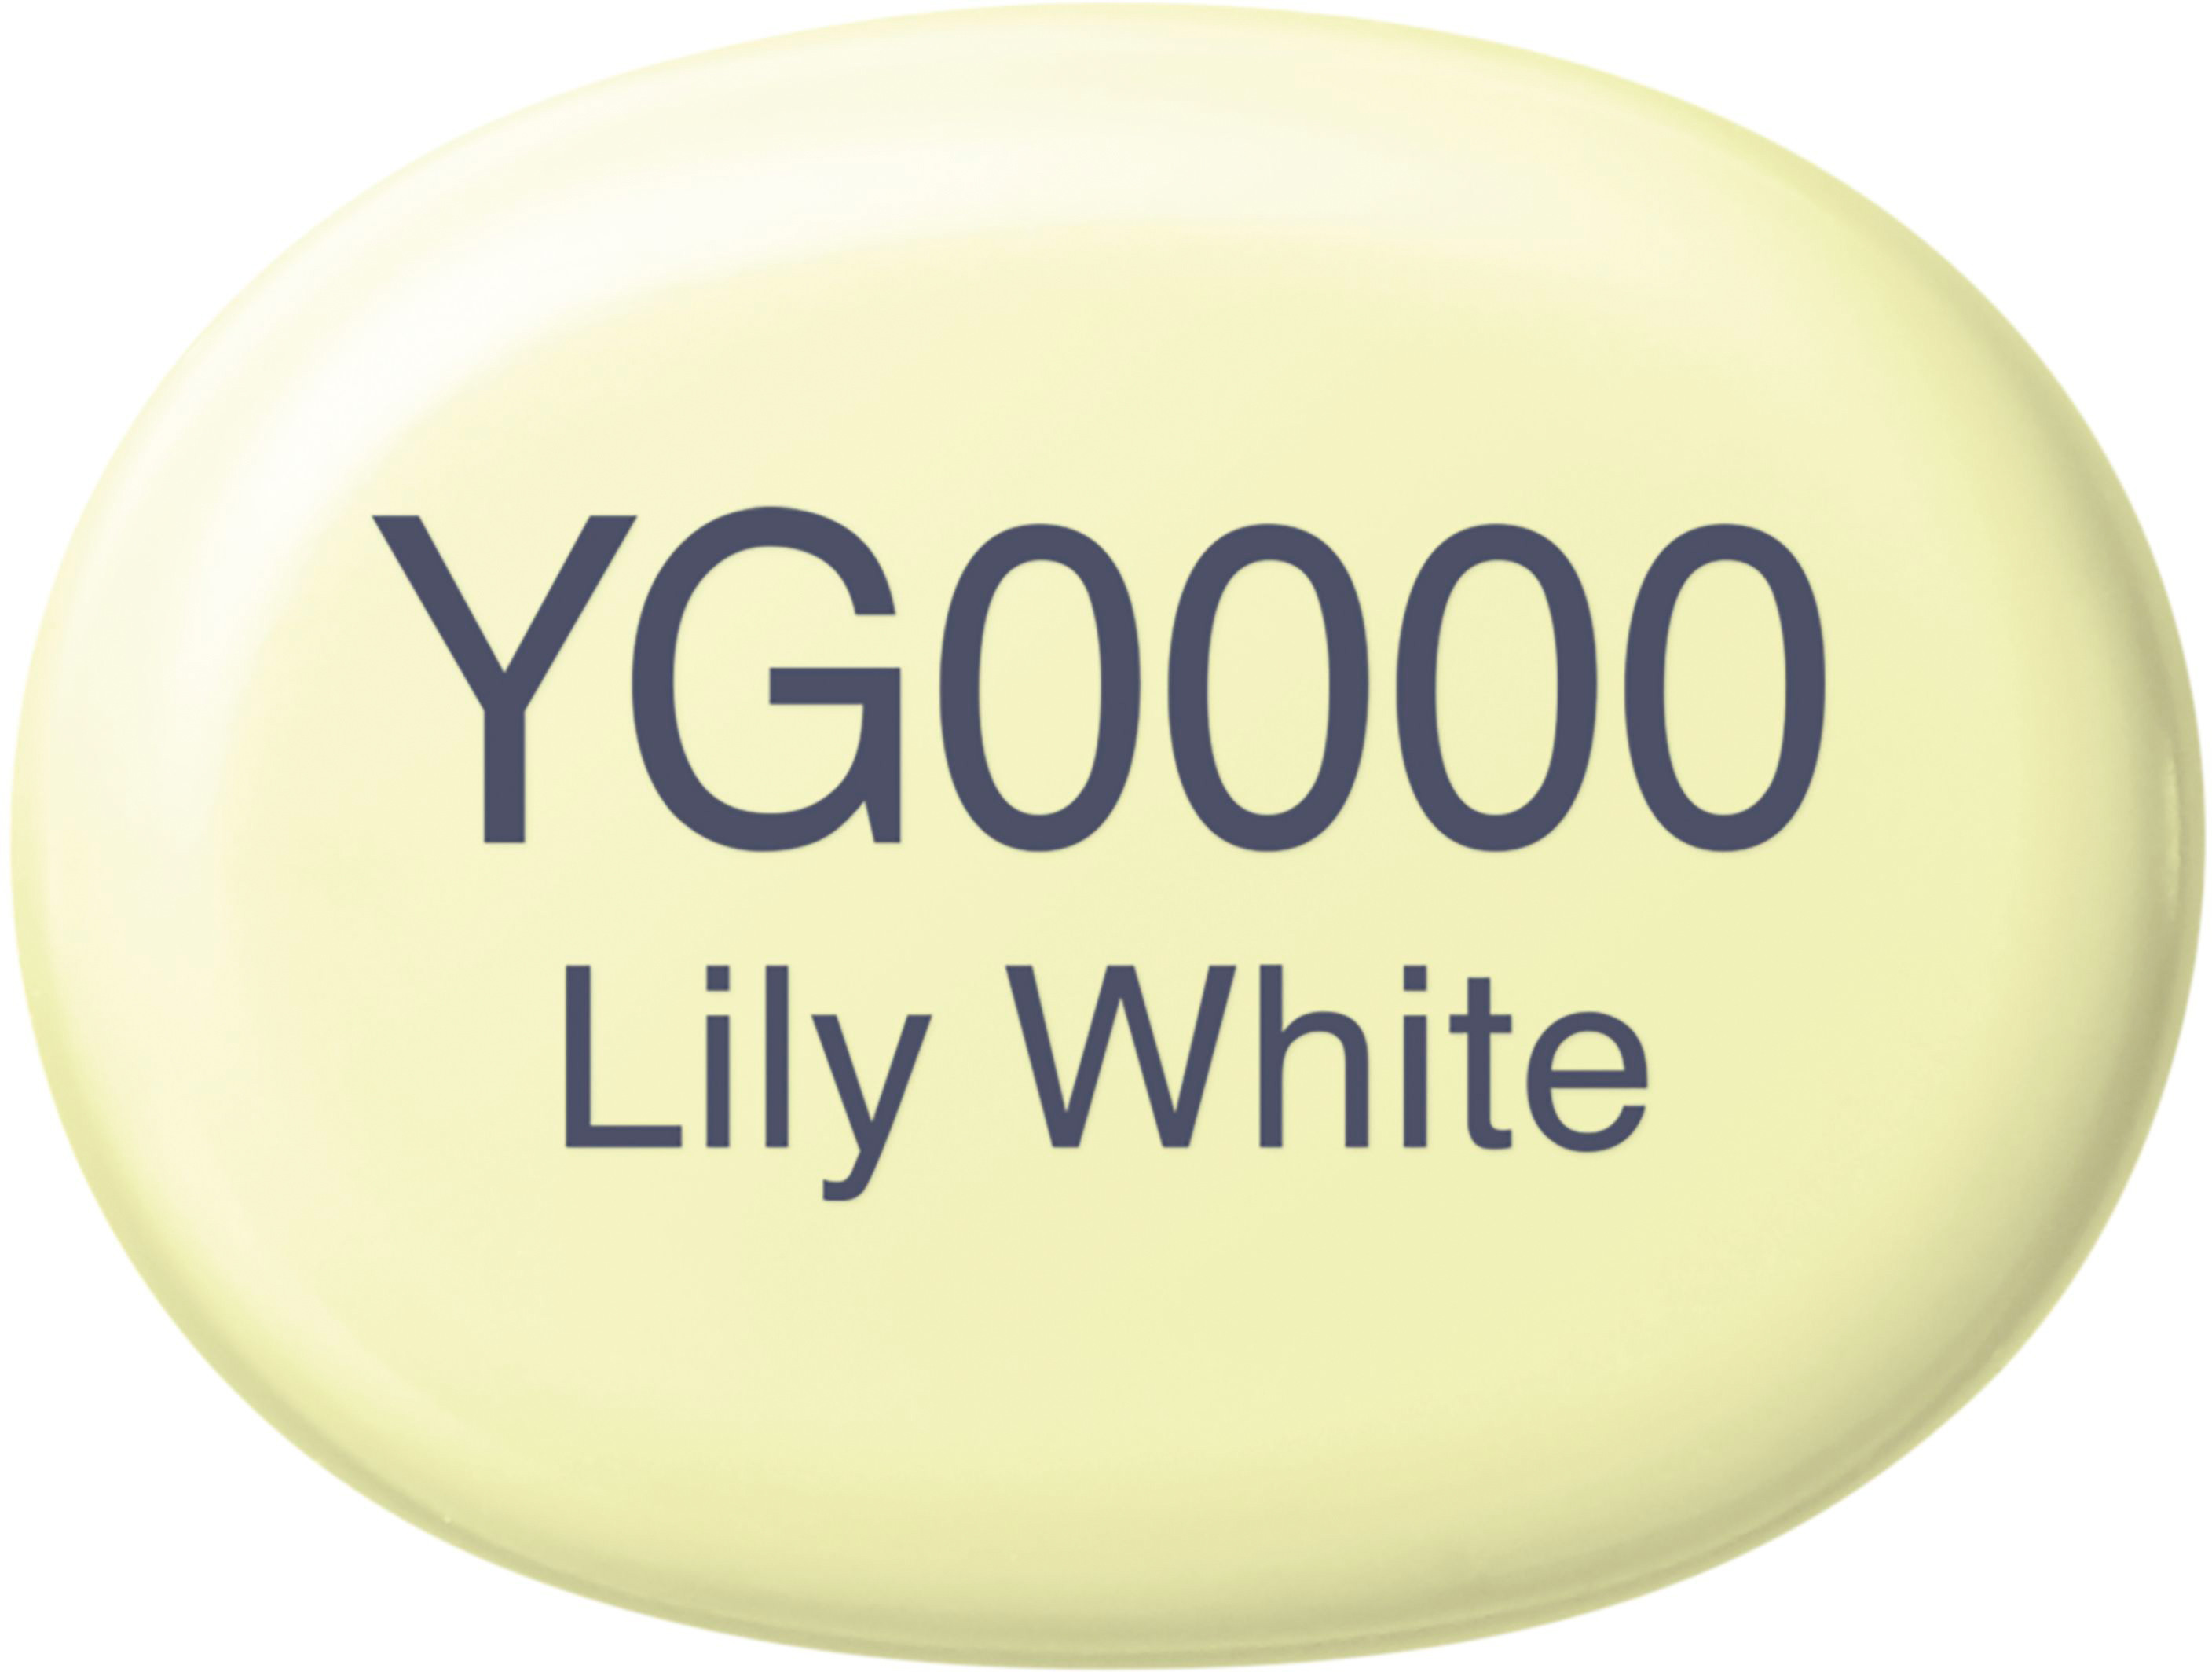 COPIC Marker Sketch 21075353 YG0000 - Lily White